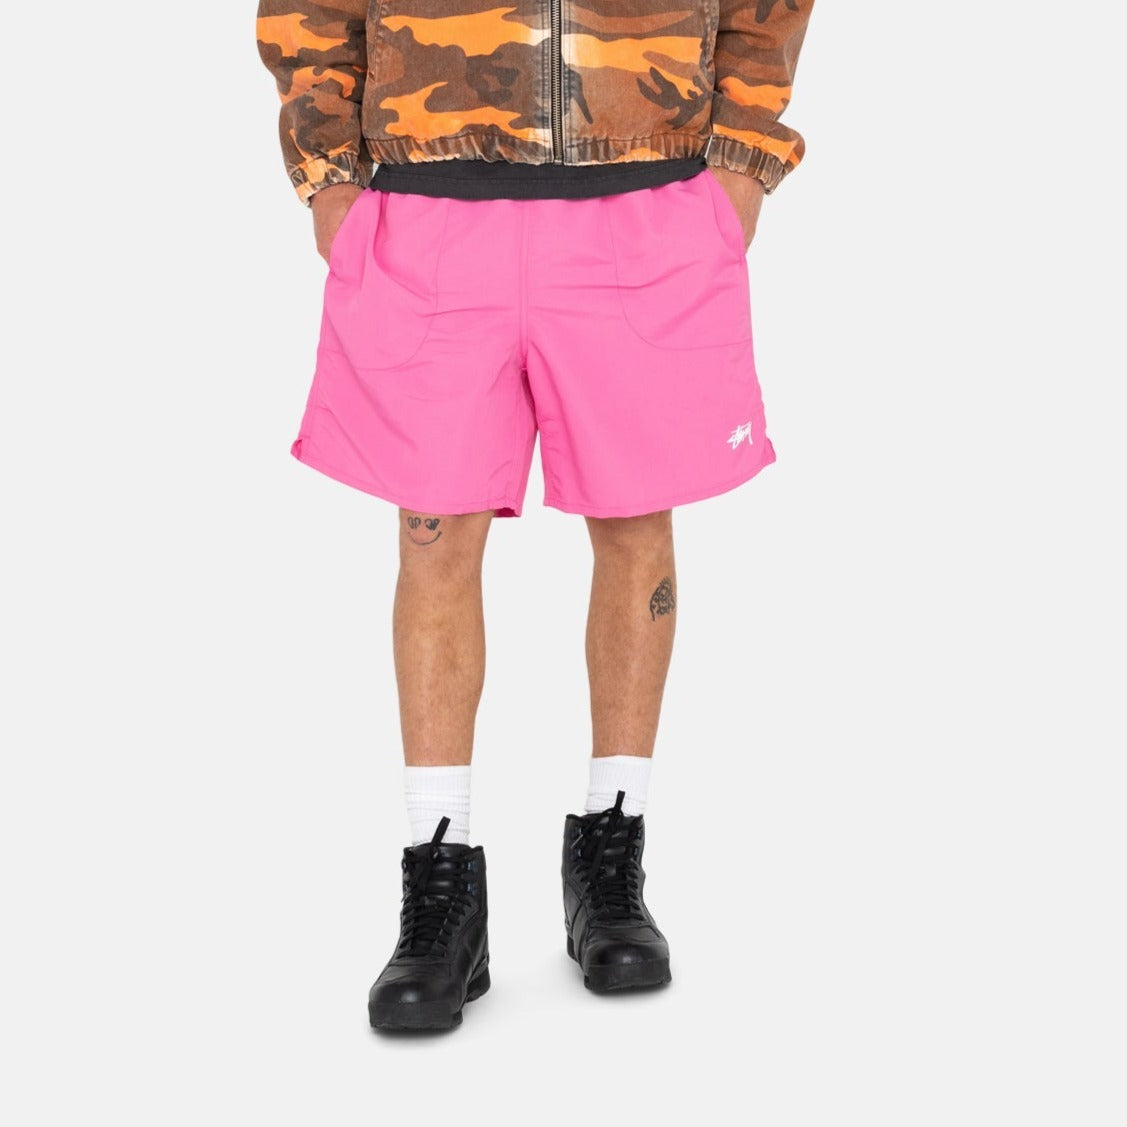 Stussy   Stock Water Short   Gum Pink   available at LCD